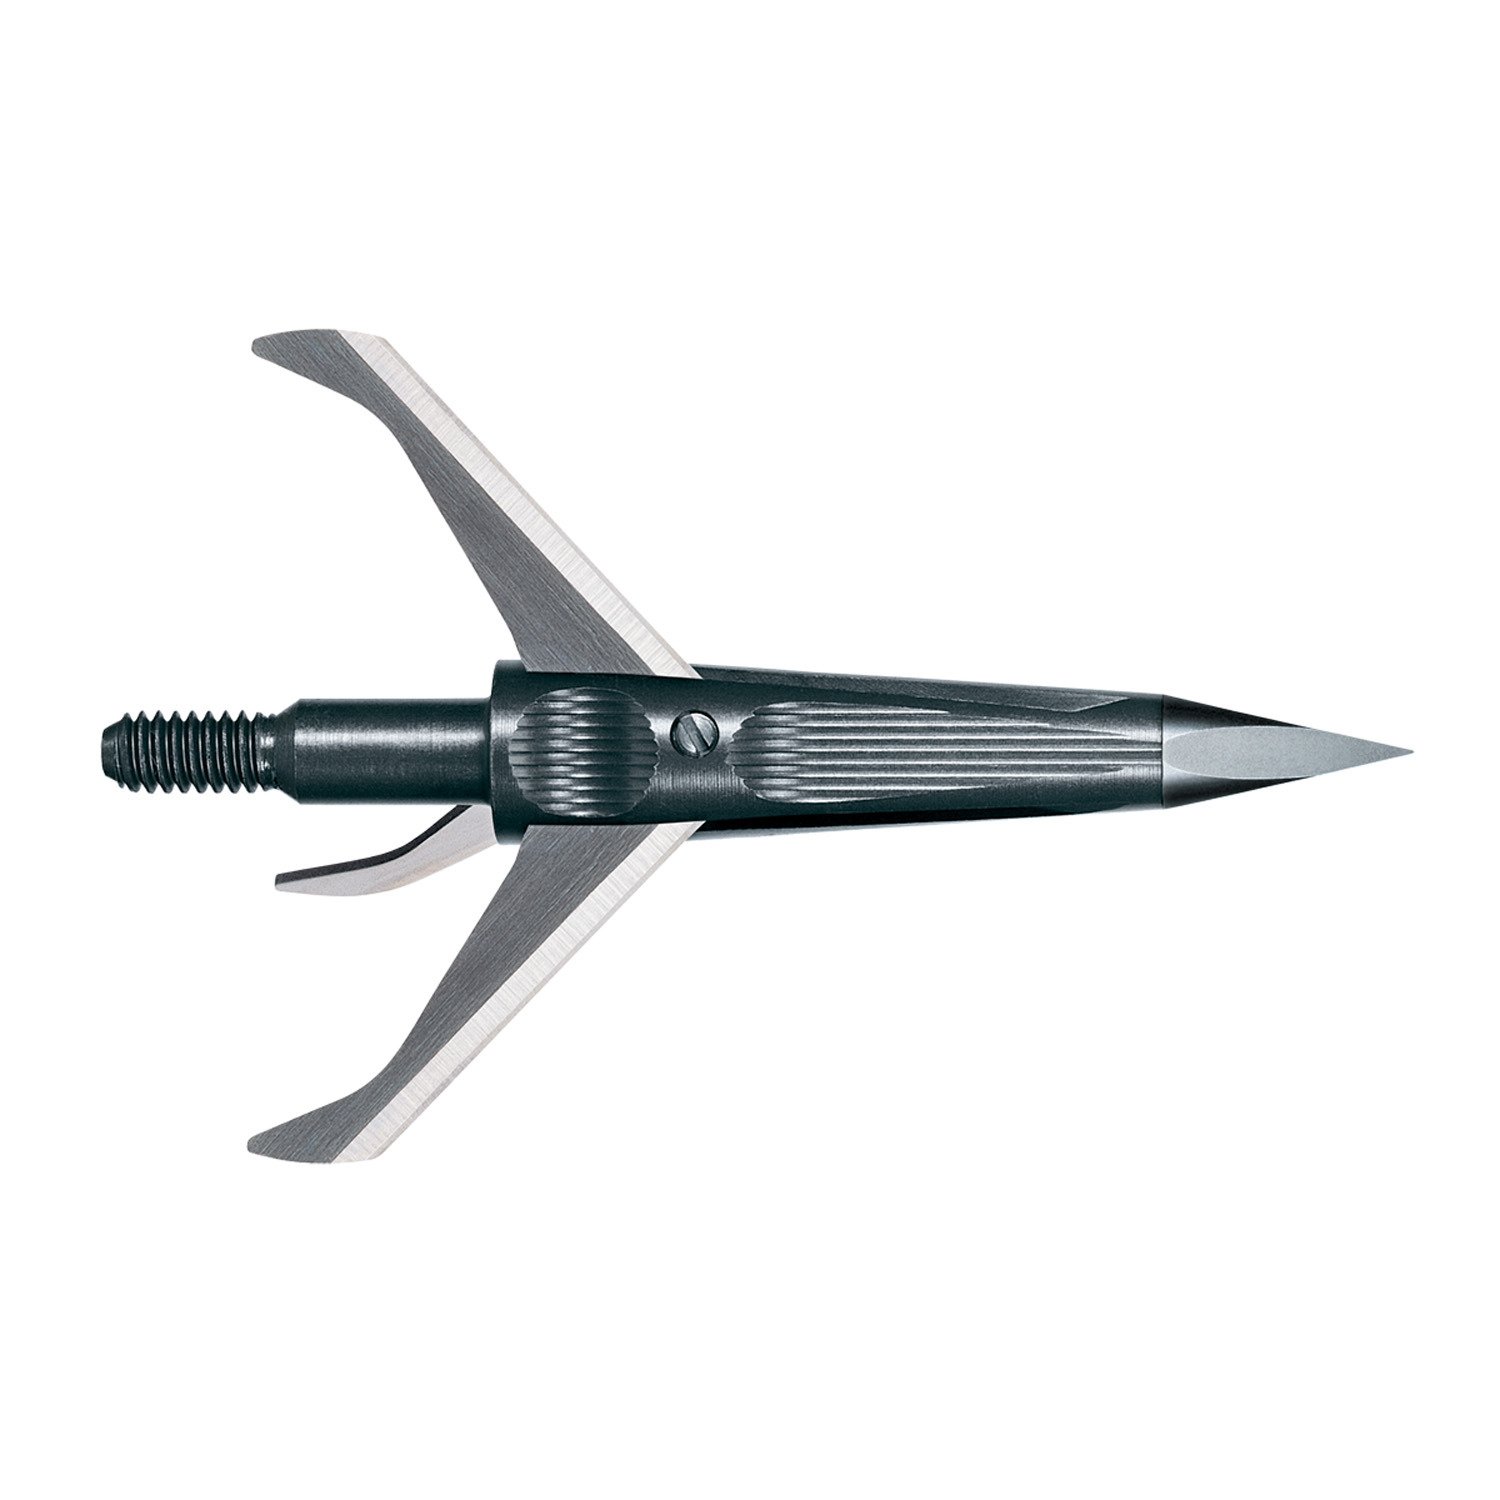 New Archery Products Spitfire Crossbow 3Blade Broadheads 3Pack Academy